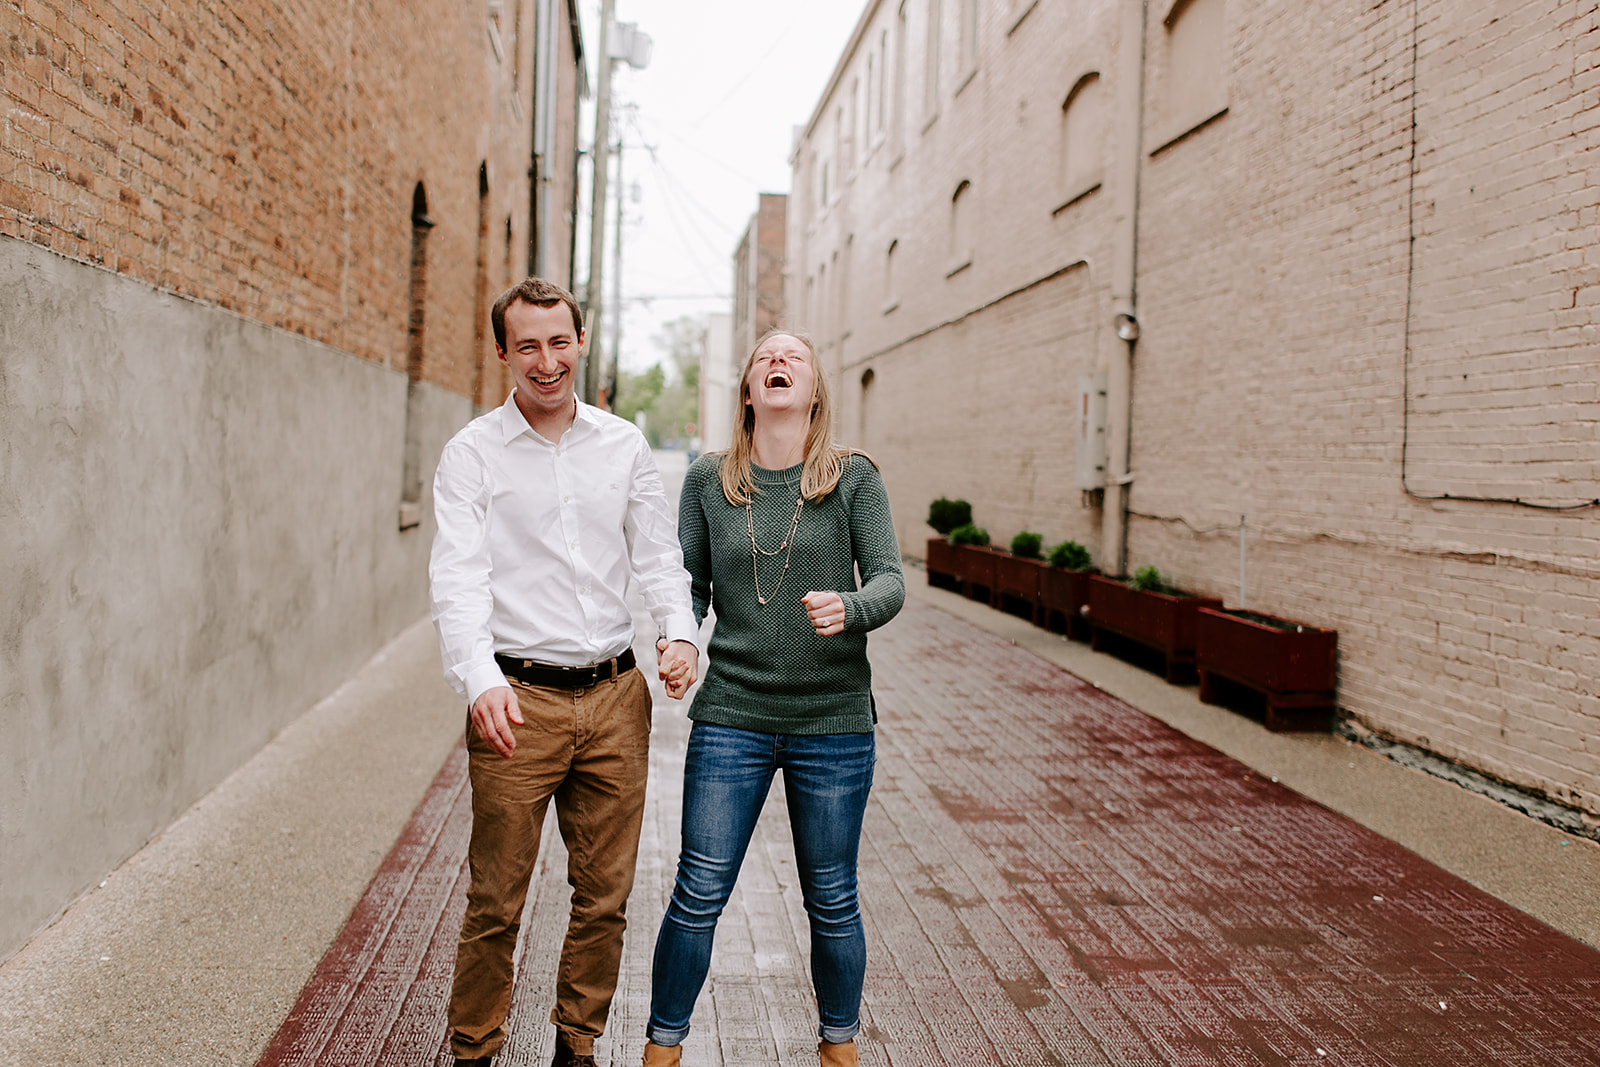 Rainy Noblesville Engagement Session including outfit ideas and posing inspiration | Photography by Emily Elyse Wehner, Noblesville Engagement photographer